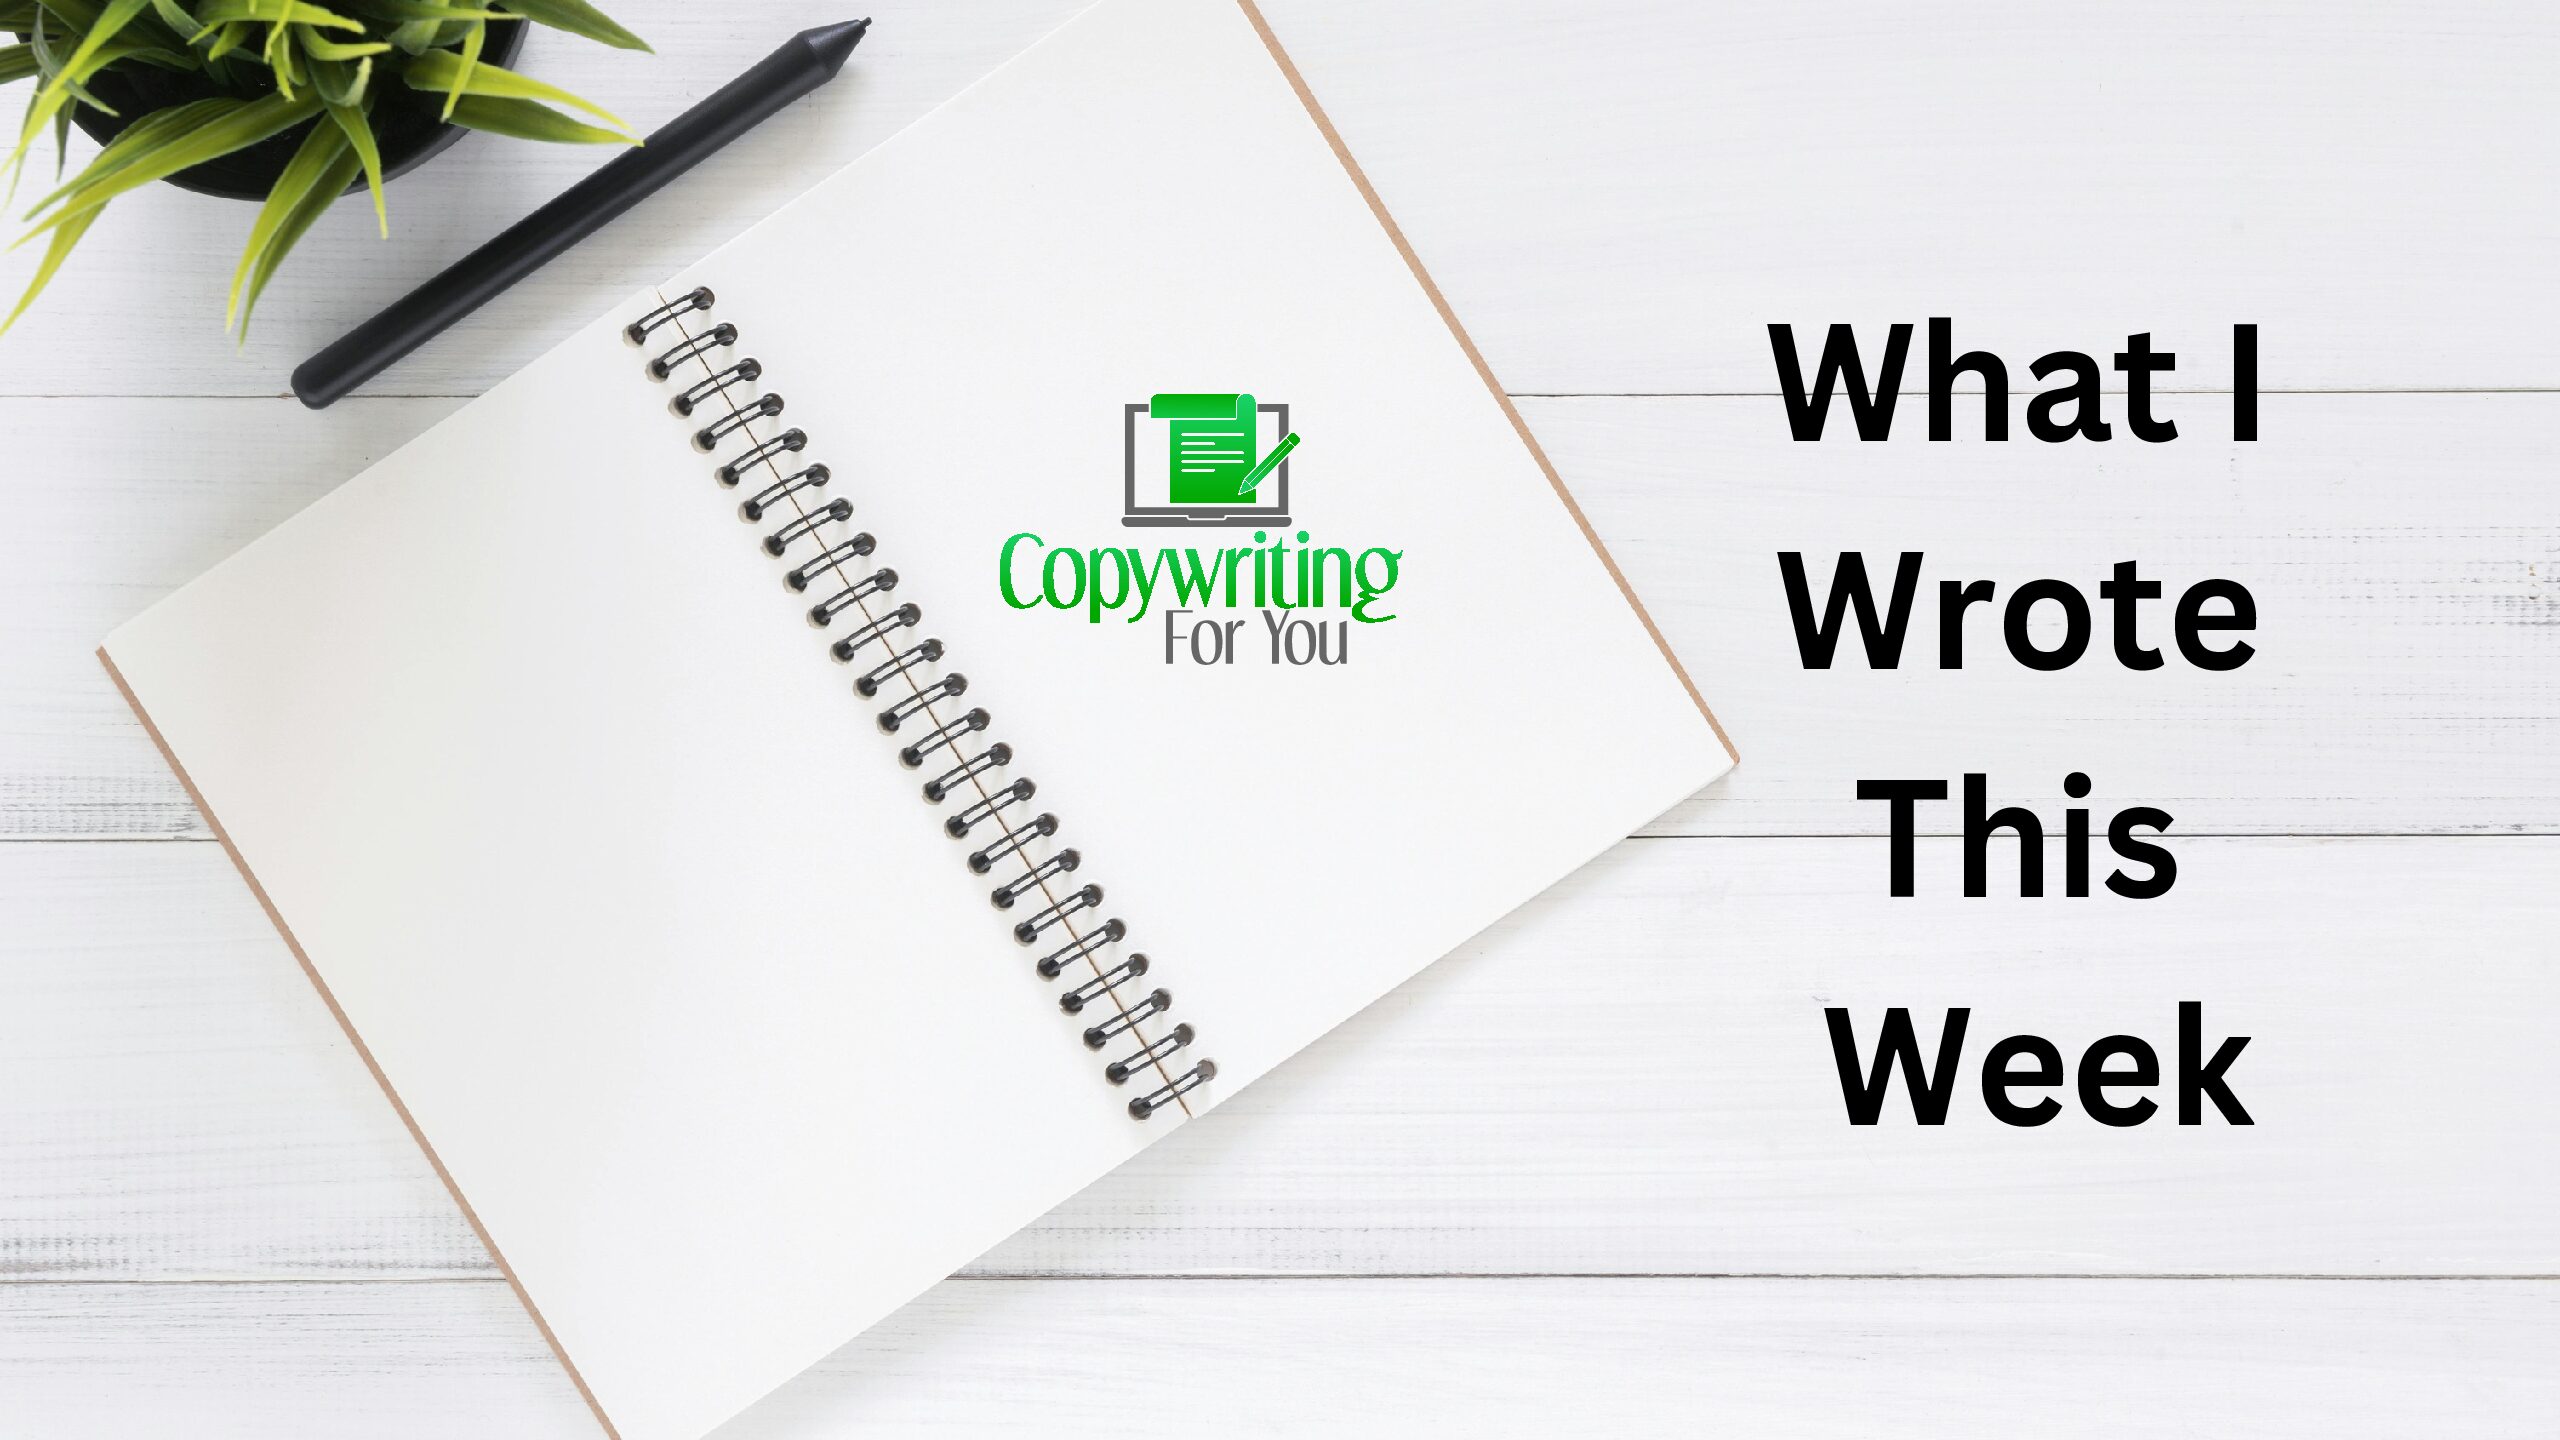 What I Wrote This Week at Copywriting For You